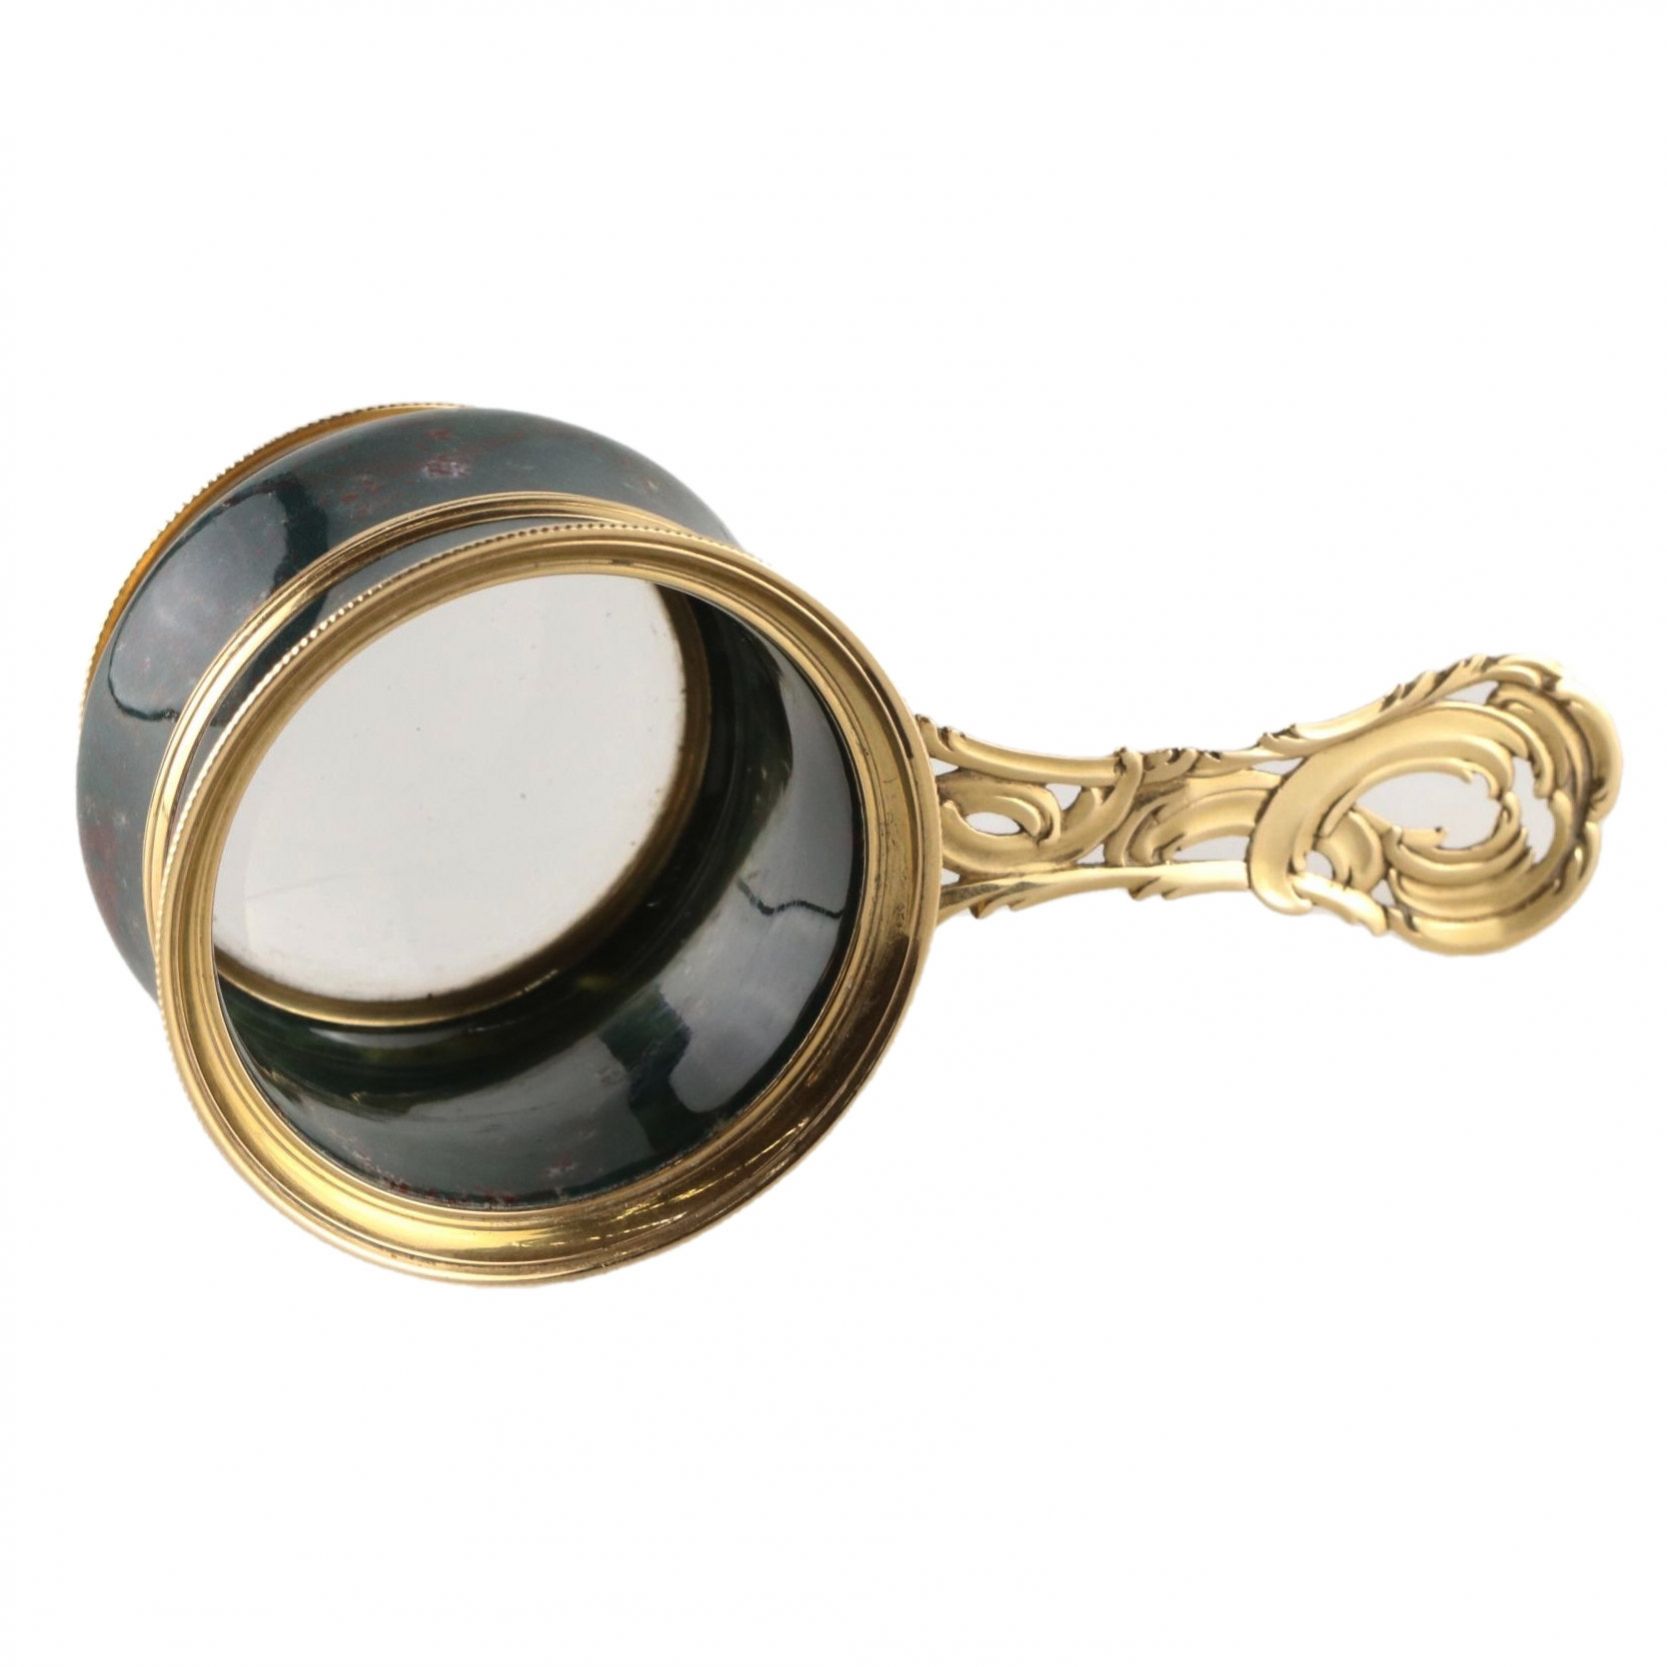 Magnifier in gold frame. - Image 8 of 10